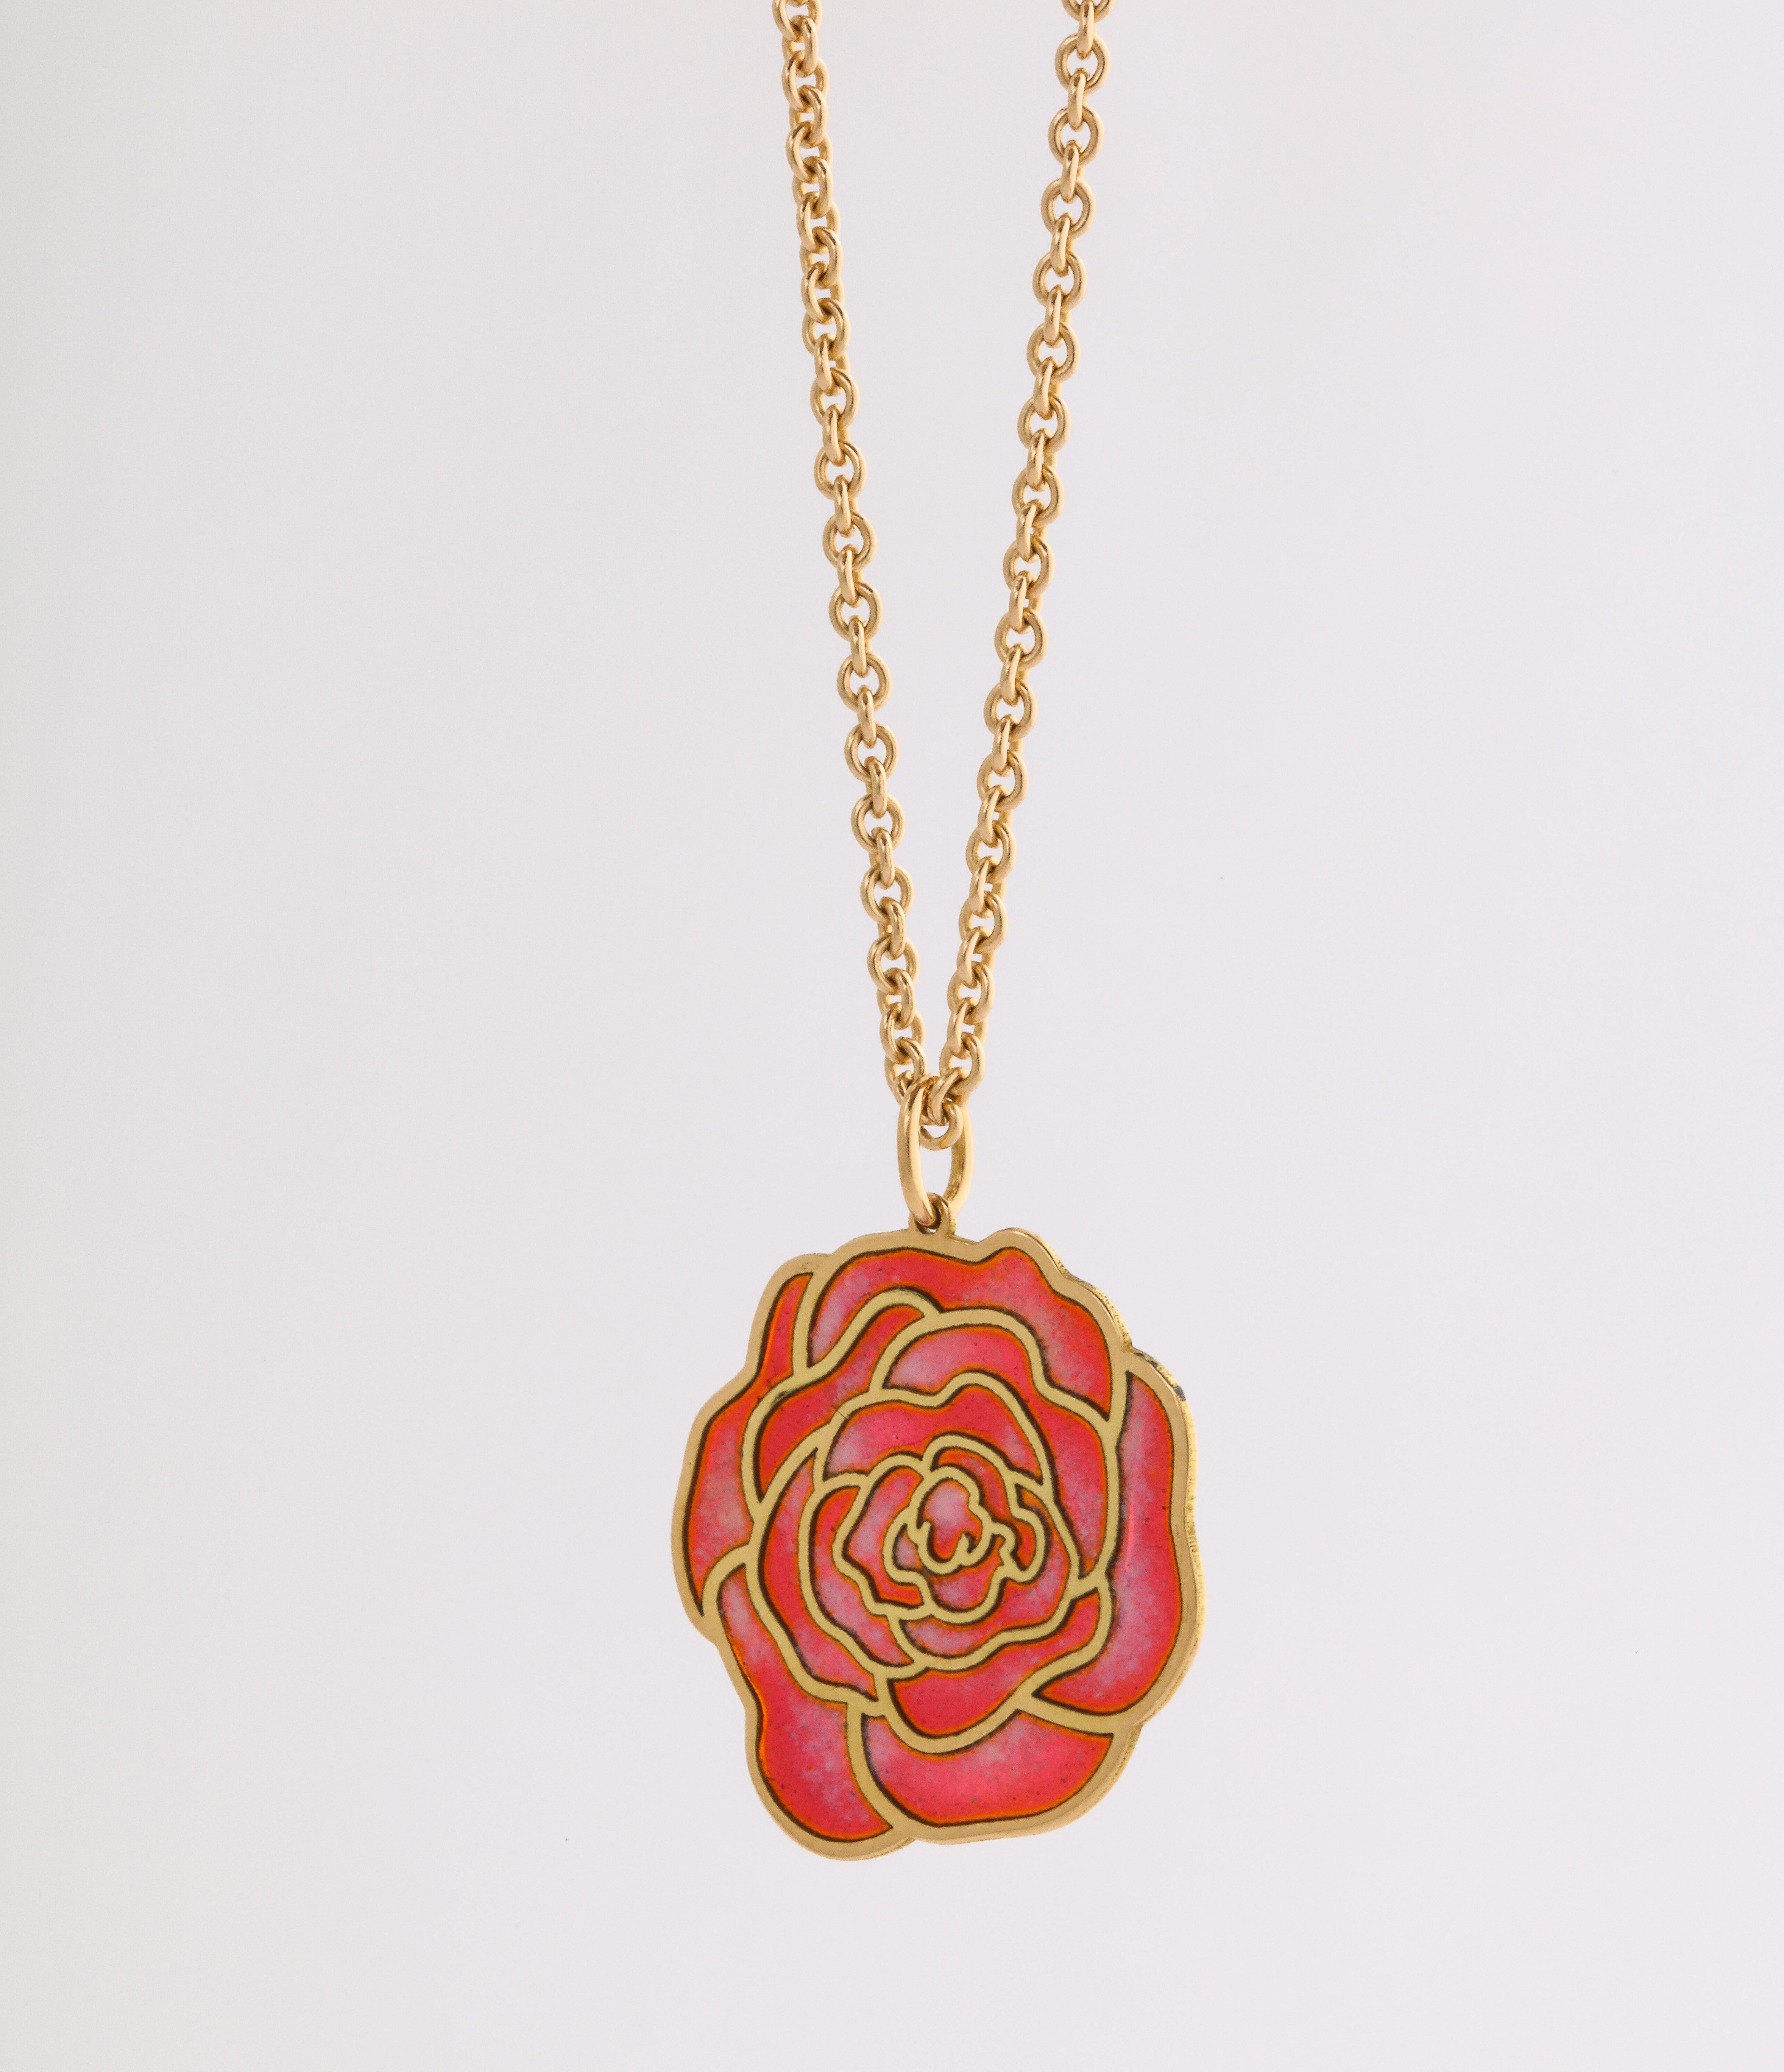 French Plique-a-jour Enameled 18k Gold Rose Pendant, Paris In New Condition For Sale In St. Catharines, ON